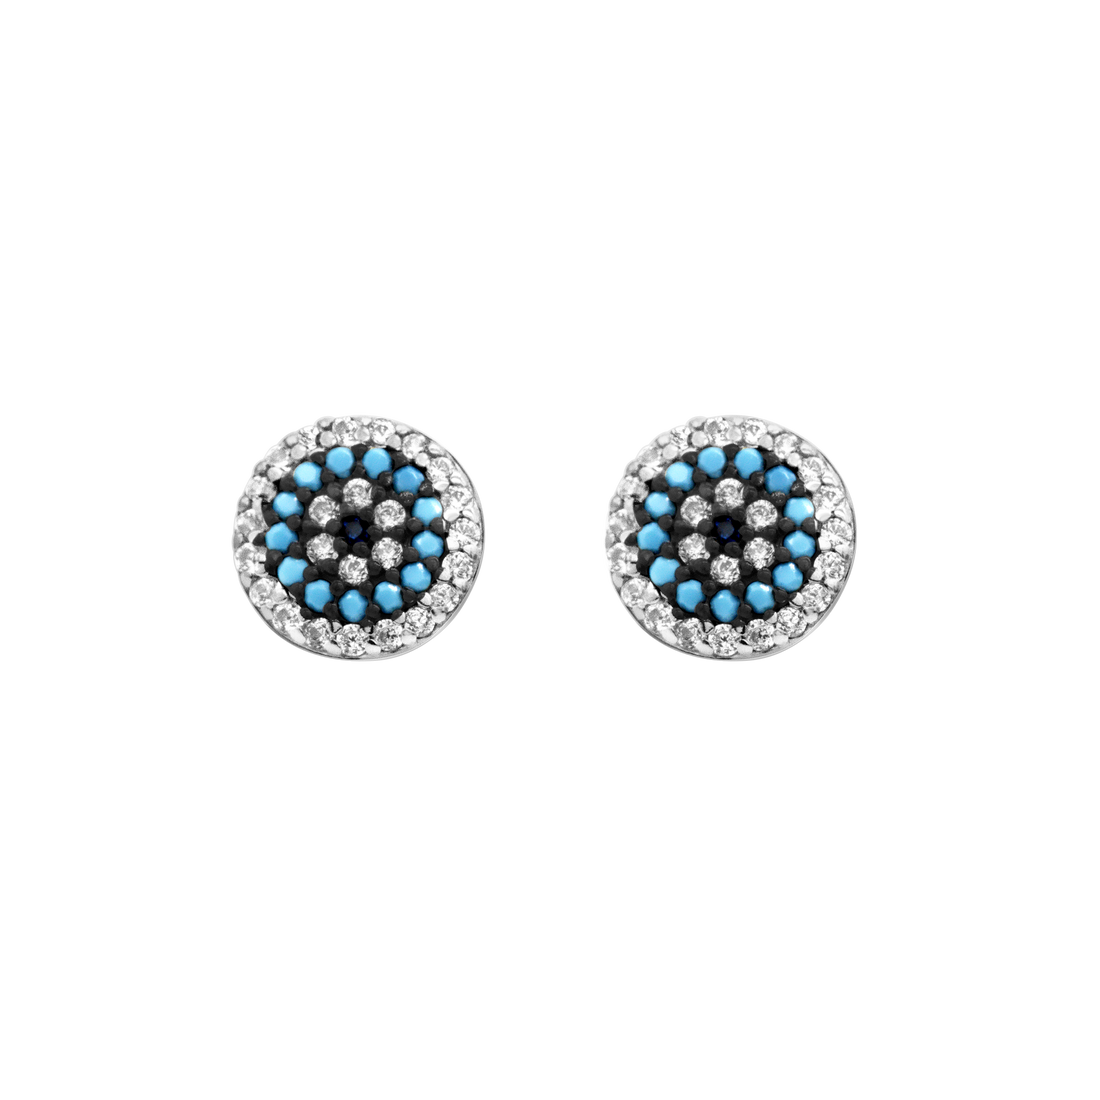 Turkish Design Silver Color Earrings